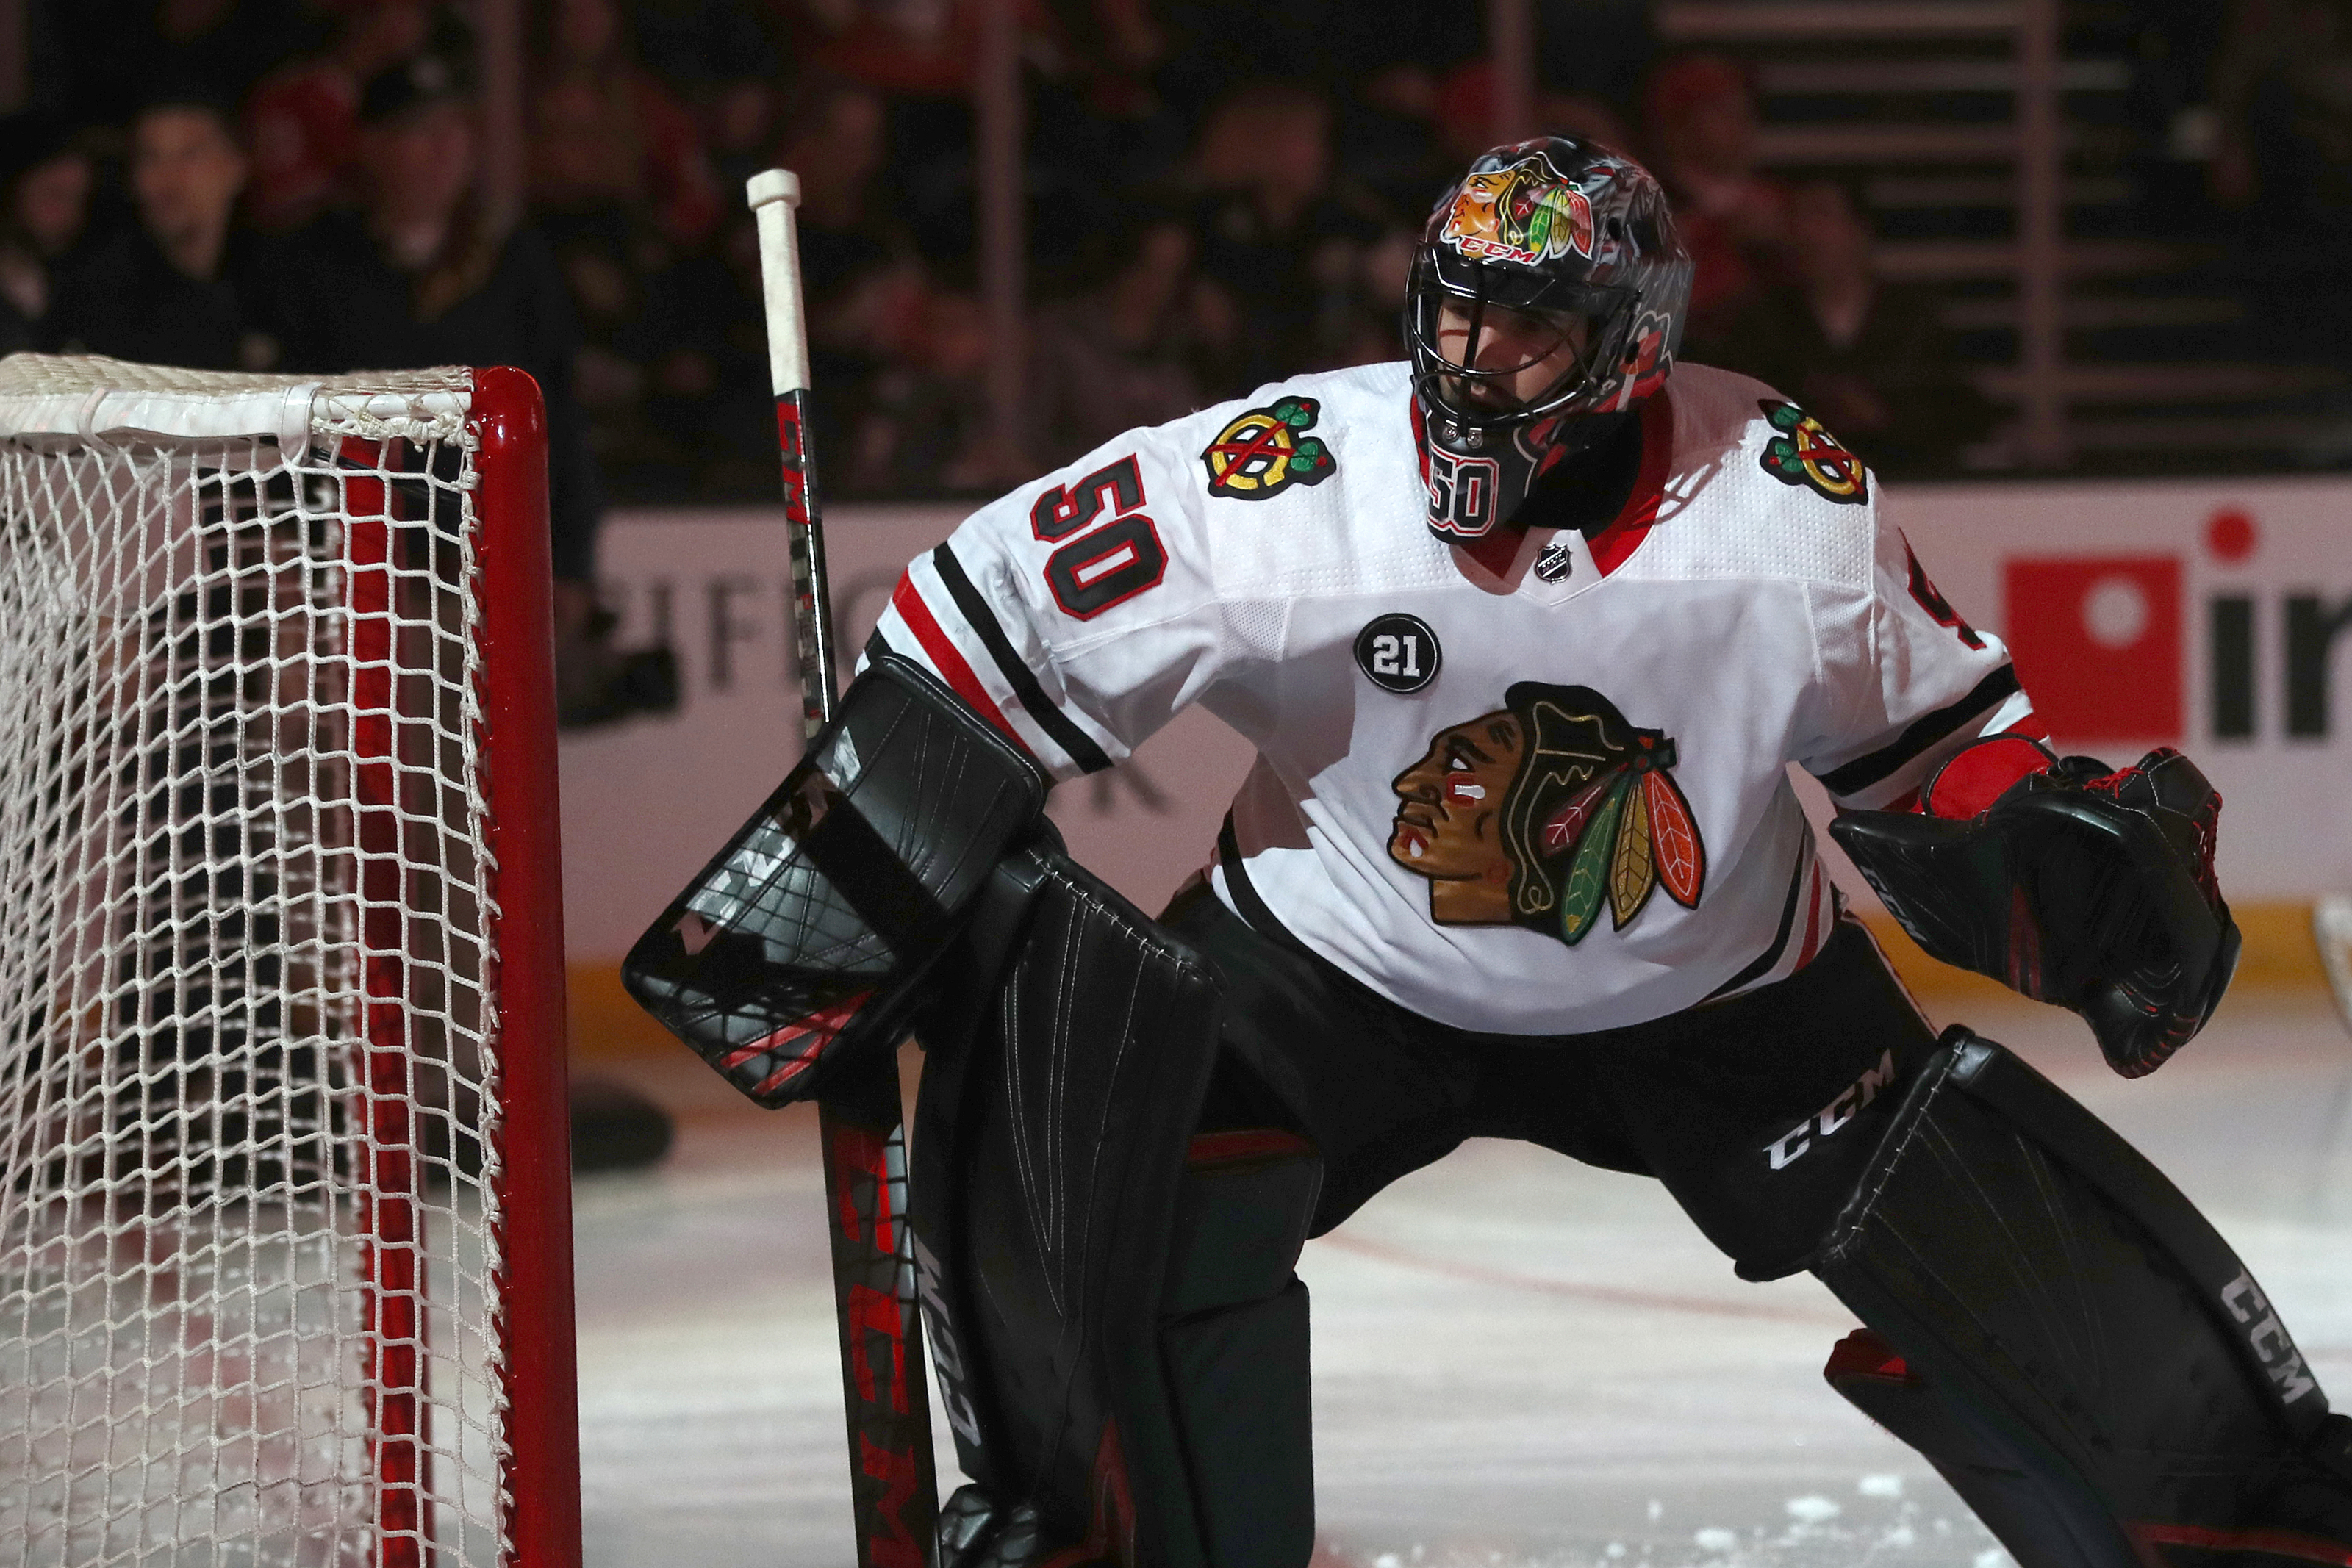 Blackhawks Stand Behind Corey Crawford as Their Goalie - The New